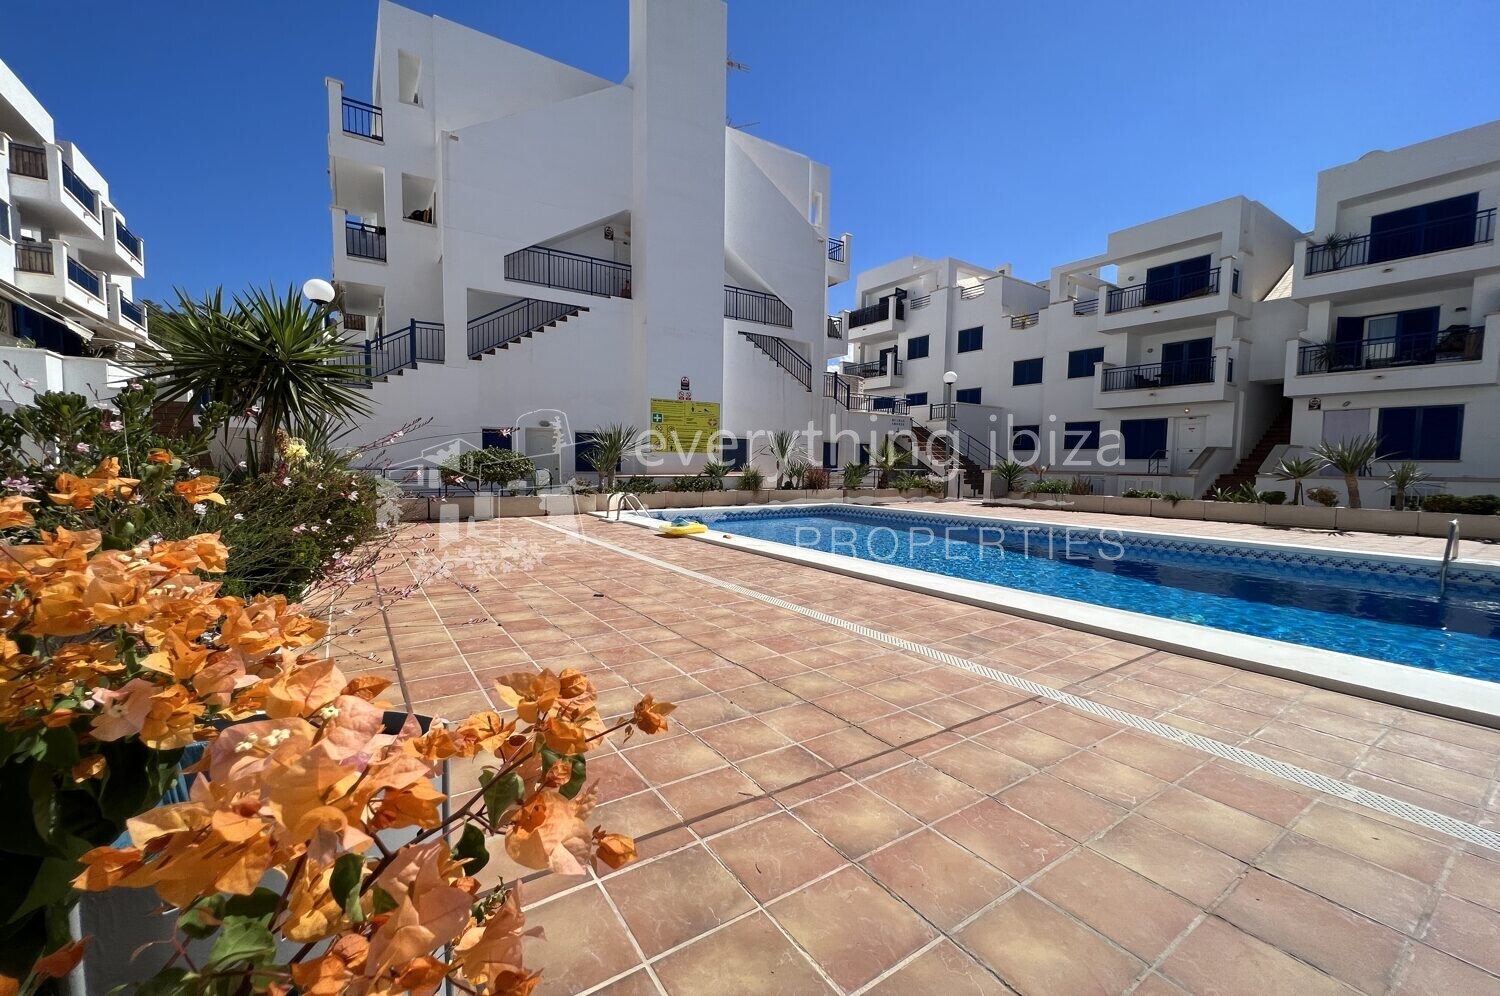 Frontline Duplex Penthouse with Sea & Sunset Views, ref. 1479, for sale in Ibiza by everything ibiza Properties